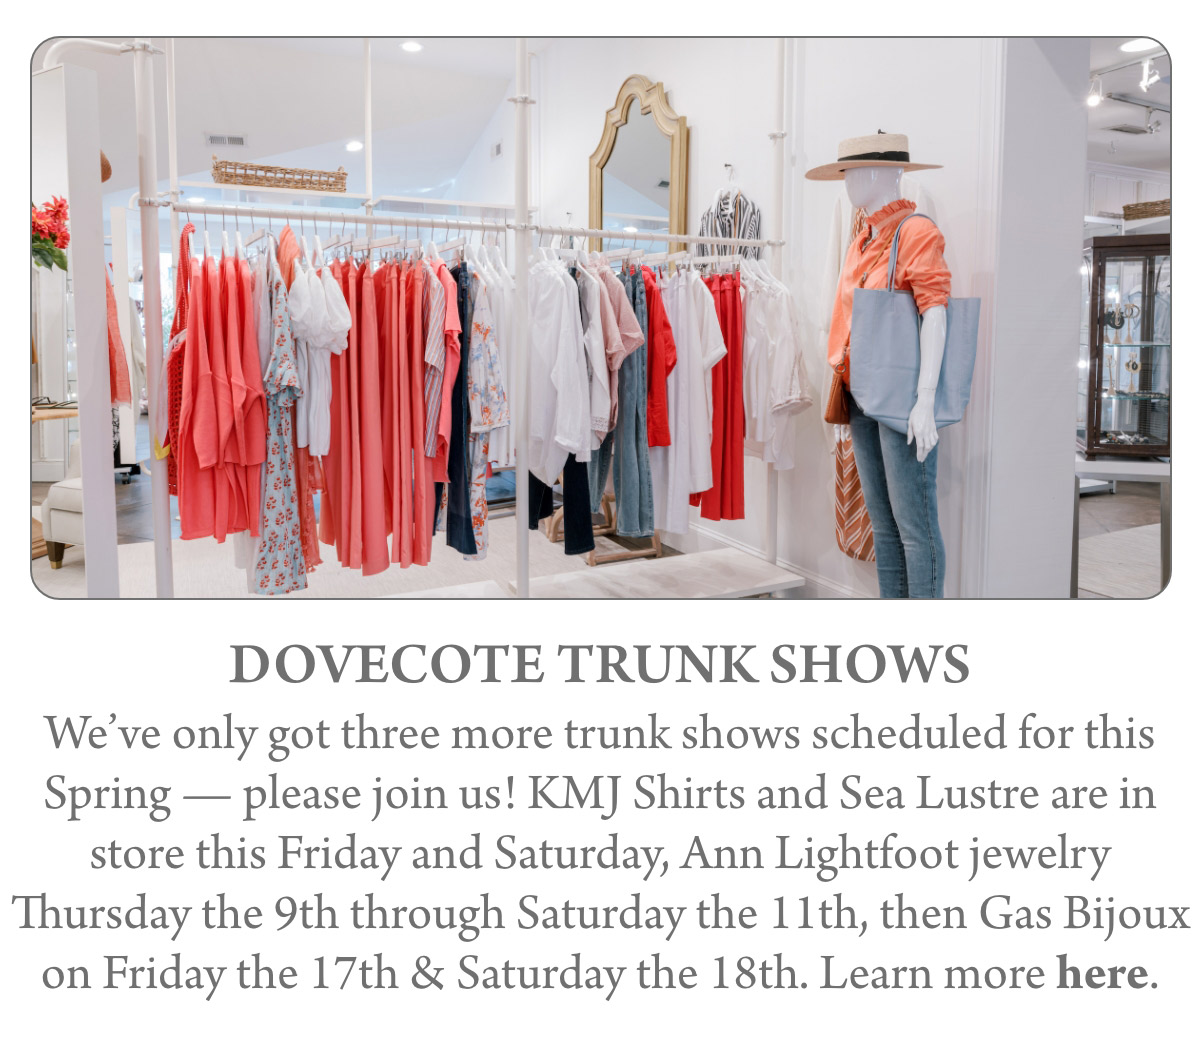 DOVECOTE TRUNK SHOWS We’ve only got three more trunk shows scheduled for this Spring — please join us! KMJ Shirts and Sea Lustre are in store this Friday and Saturday, Ann Lightfoot jewelry Thursday the 9th through Saturday the 11th, then Gas Bijoux on Friday the 17th & Saturday the 18th. Learn more here.